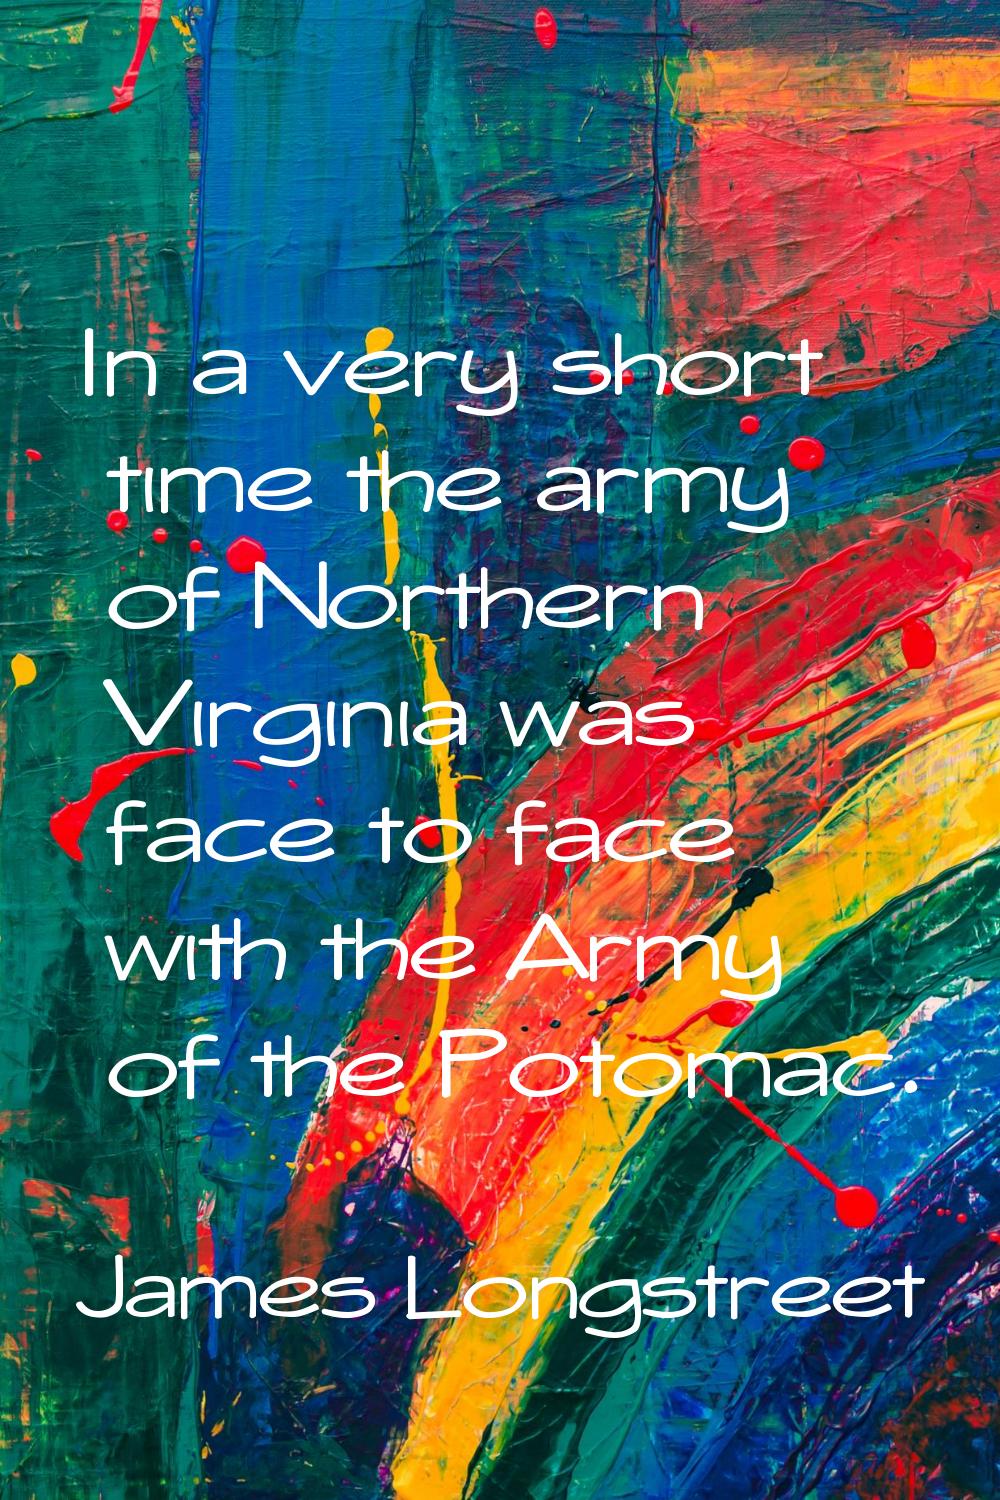 In a very short time the army of Northern Virginia was face to face with the Army of the Potomac.